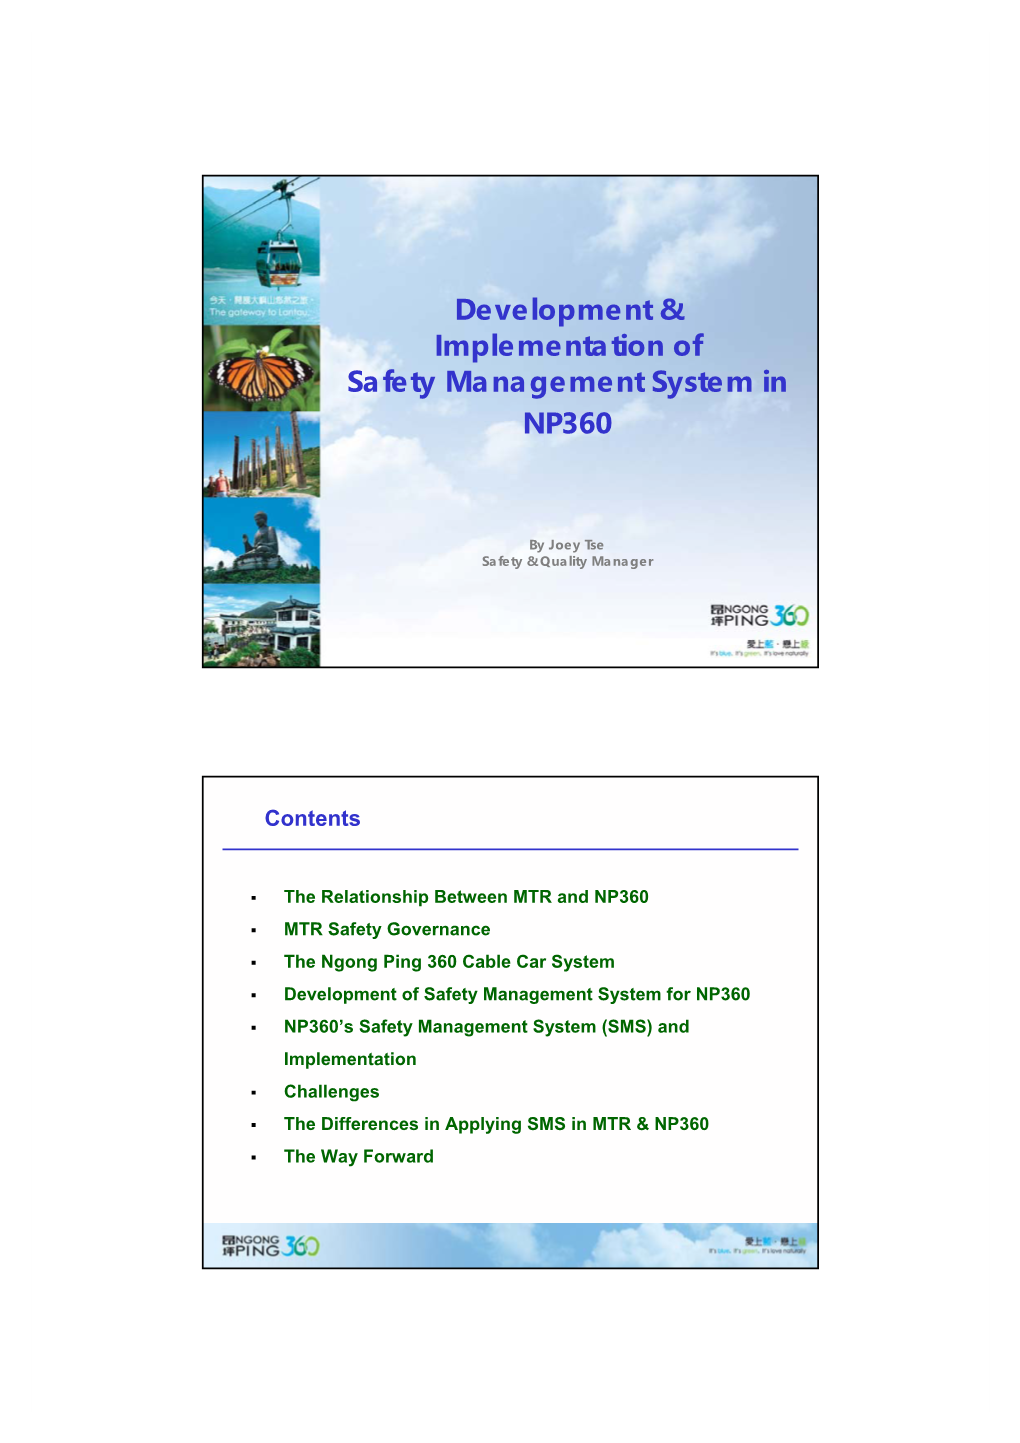 The Development and Implementation of Safety Management System In